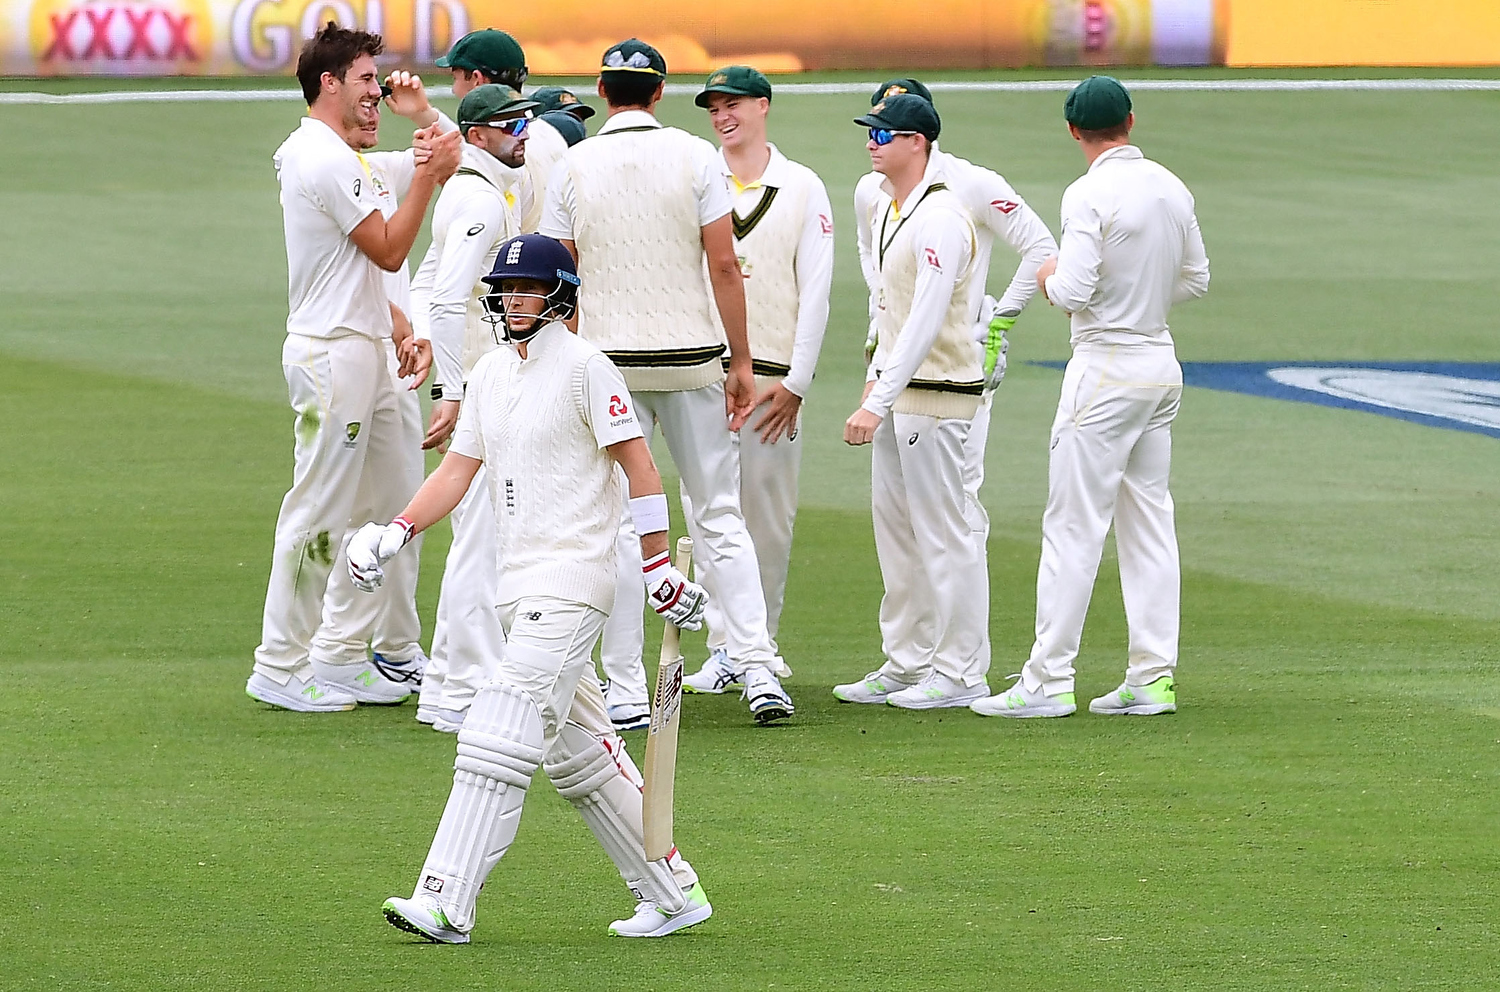 Australia celebrates after taking the wicket of Joe Root Pic: Mark Brake - CA/Cricket Australia/Getty Images